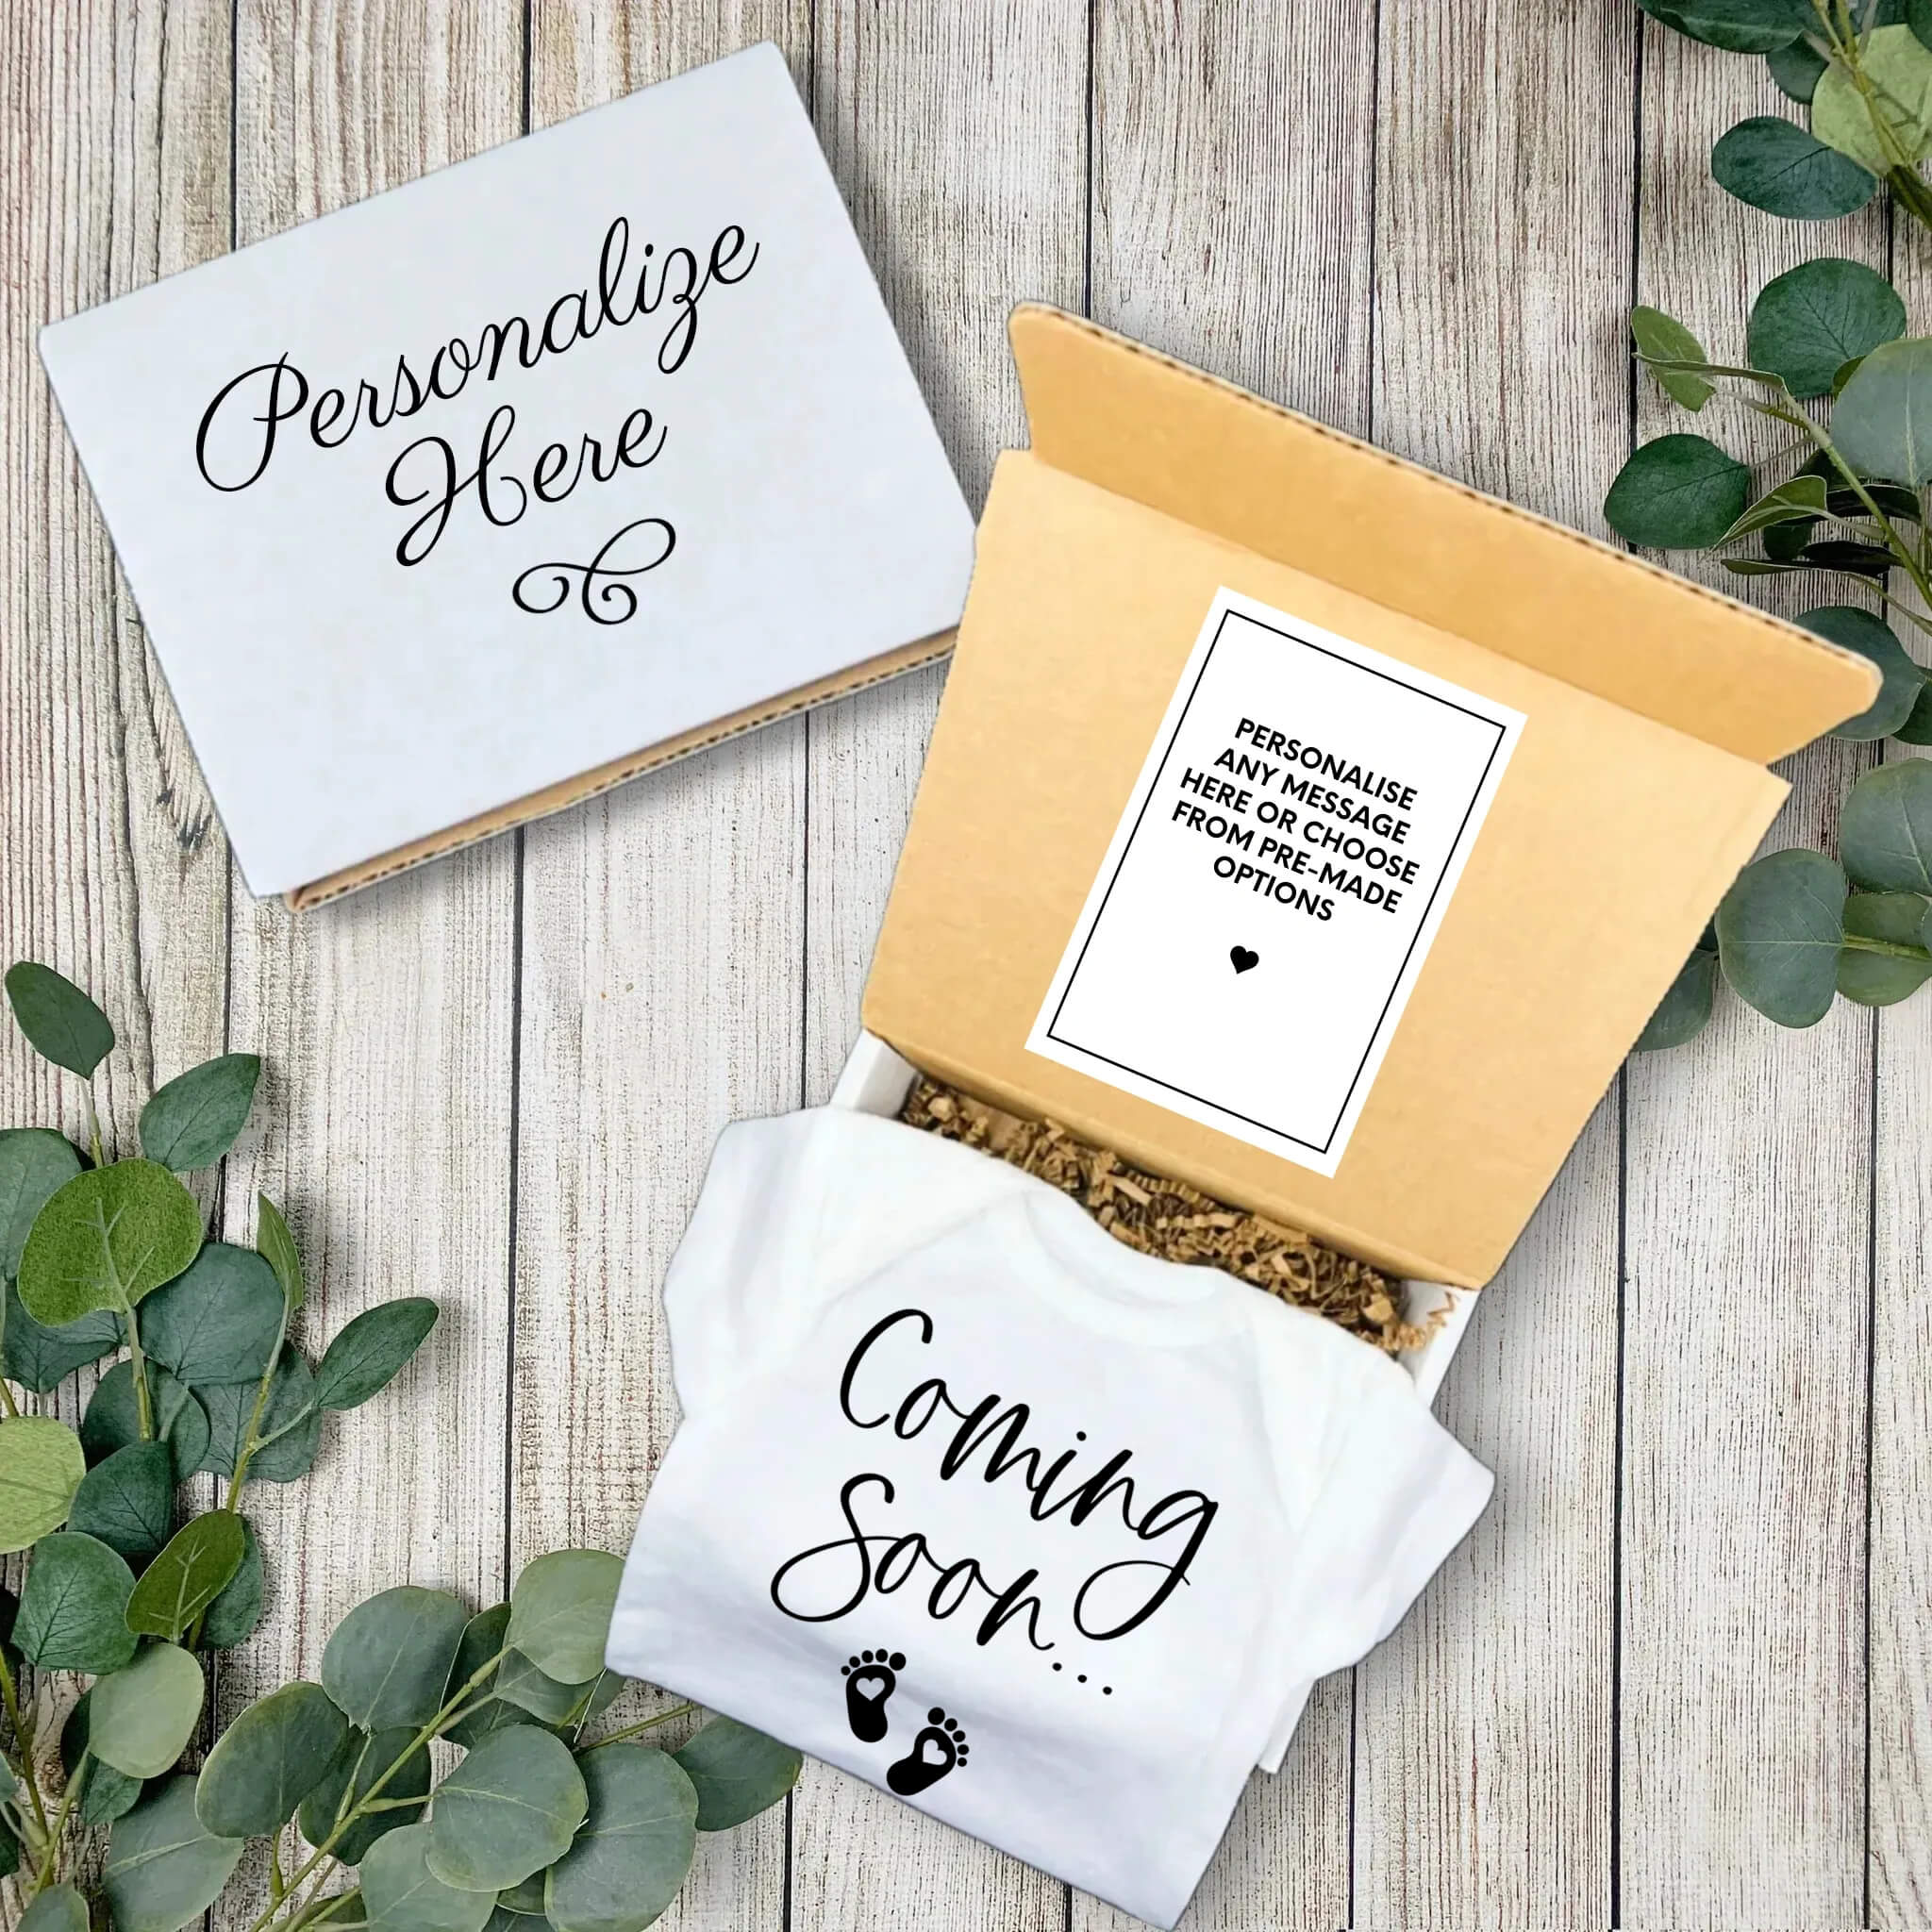 Personalized Pregnancy Announcement, Coming Soon, Dad, Grandma, Grandpa, Auntie, Uncle To Be, Cute Customized Baby Announcement Onesie Gift Box, Personalized Pregnancy Due Date Onesie Gift Box